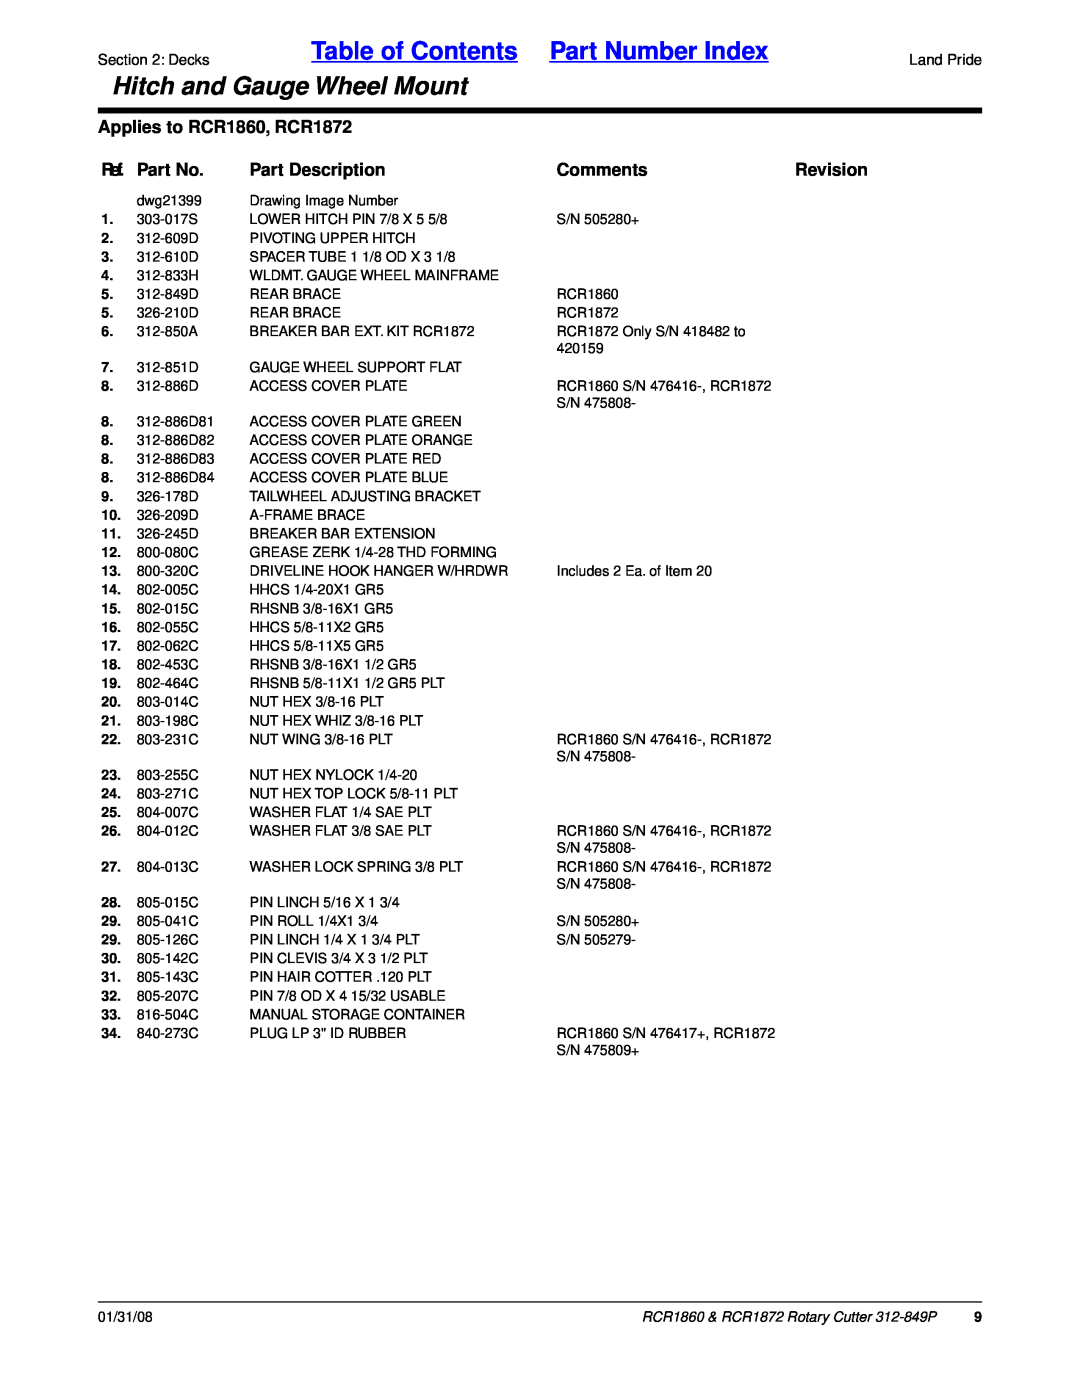 Land Pride Table of Contents Part Number Index, Hitch and Gauge Wheel Mount, Applies to RCR1860, RCR1872, Ref. Part No 